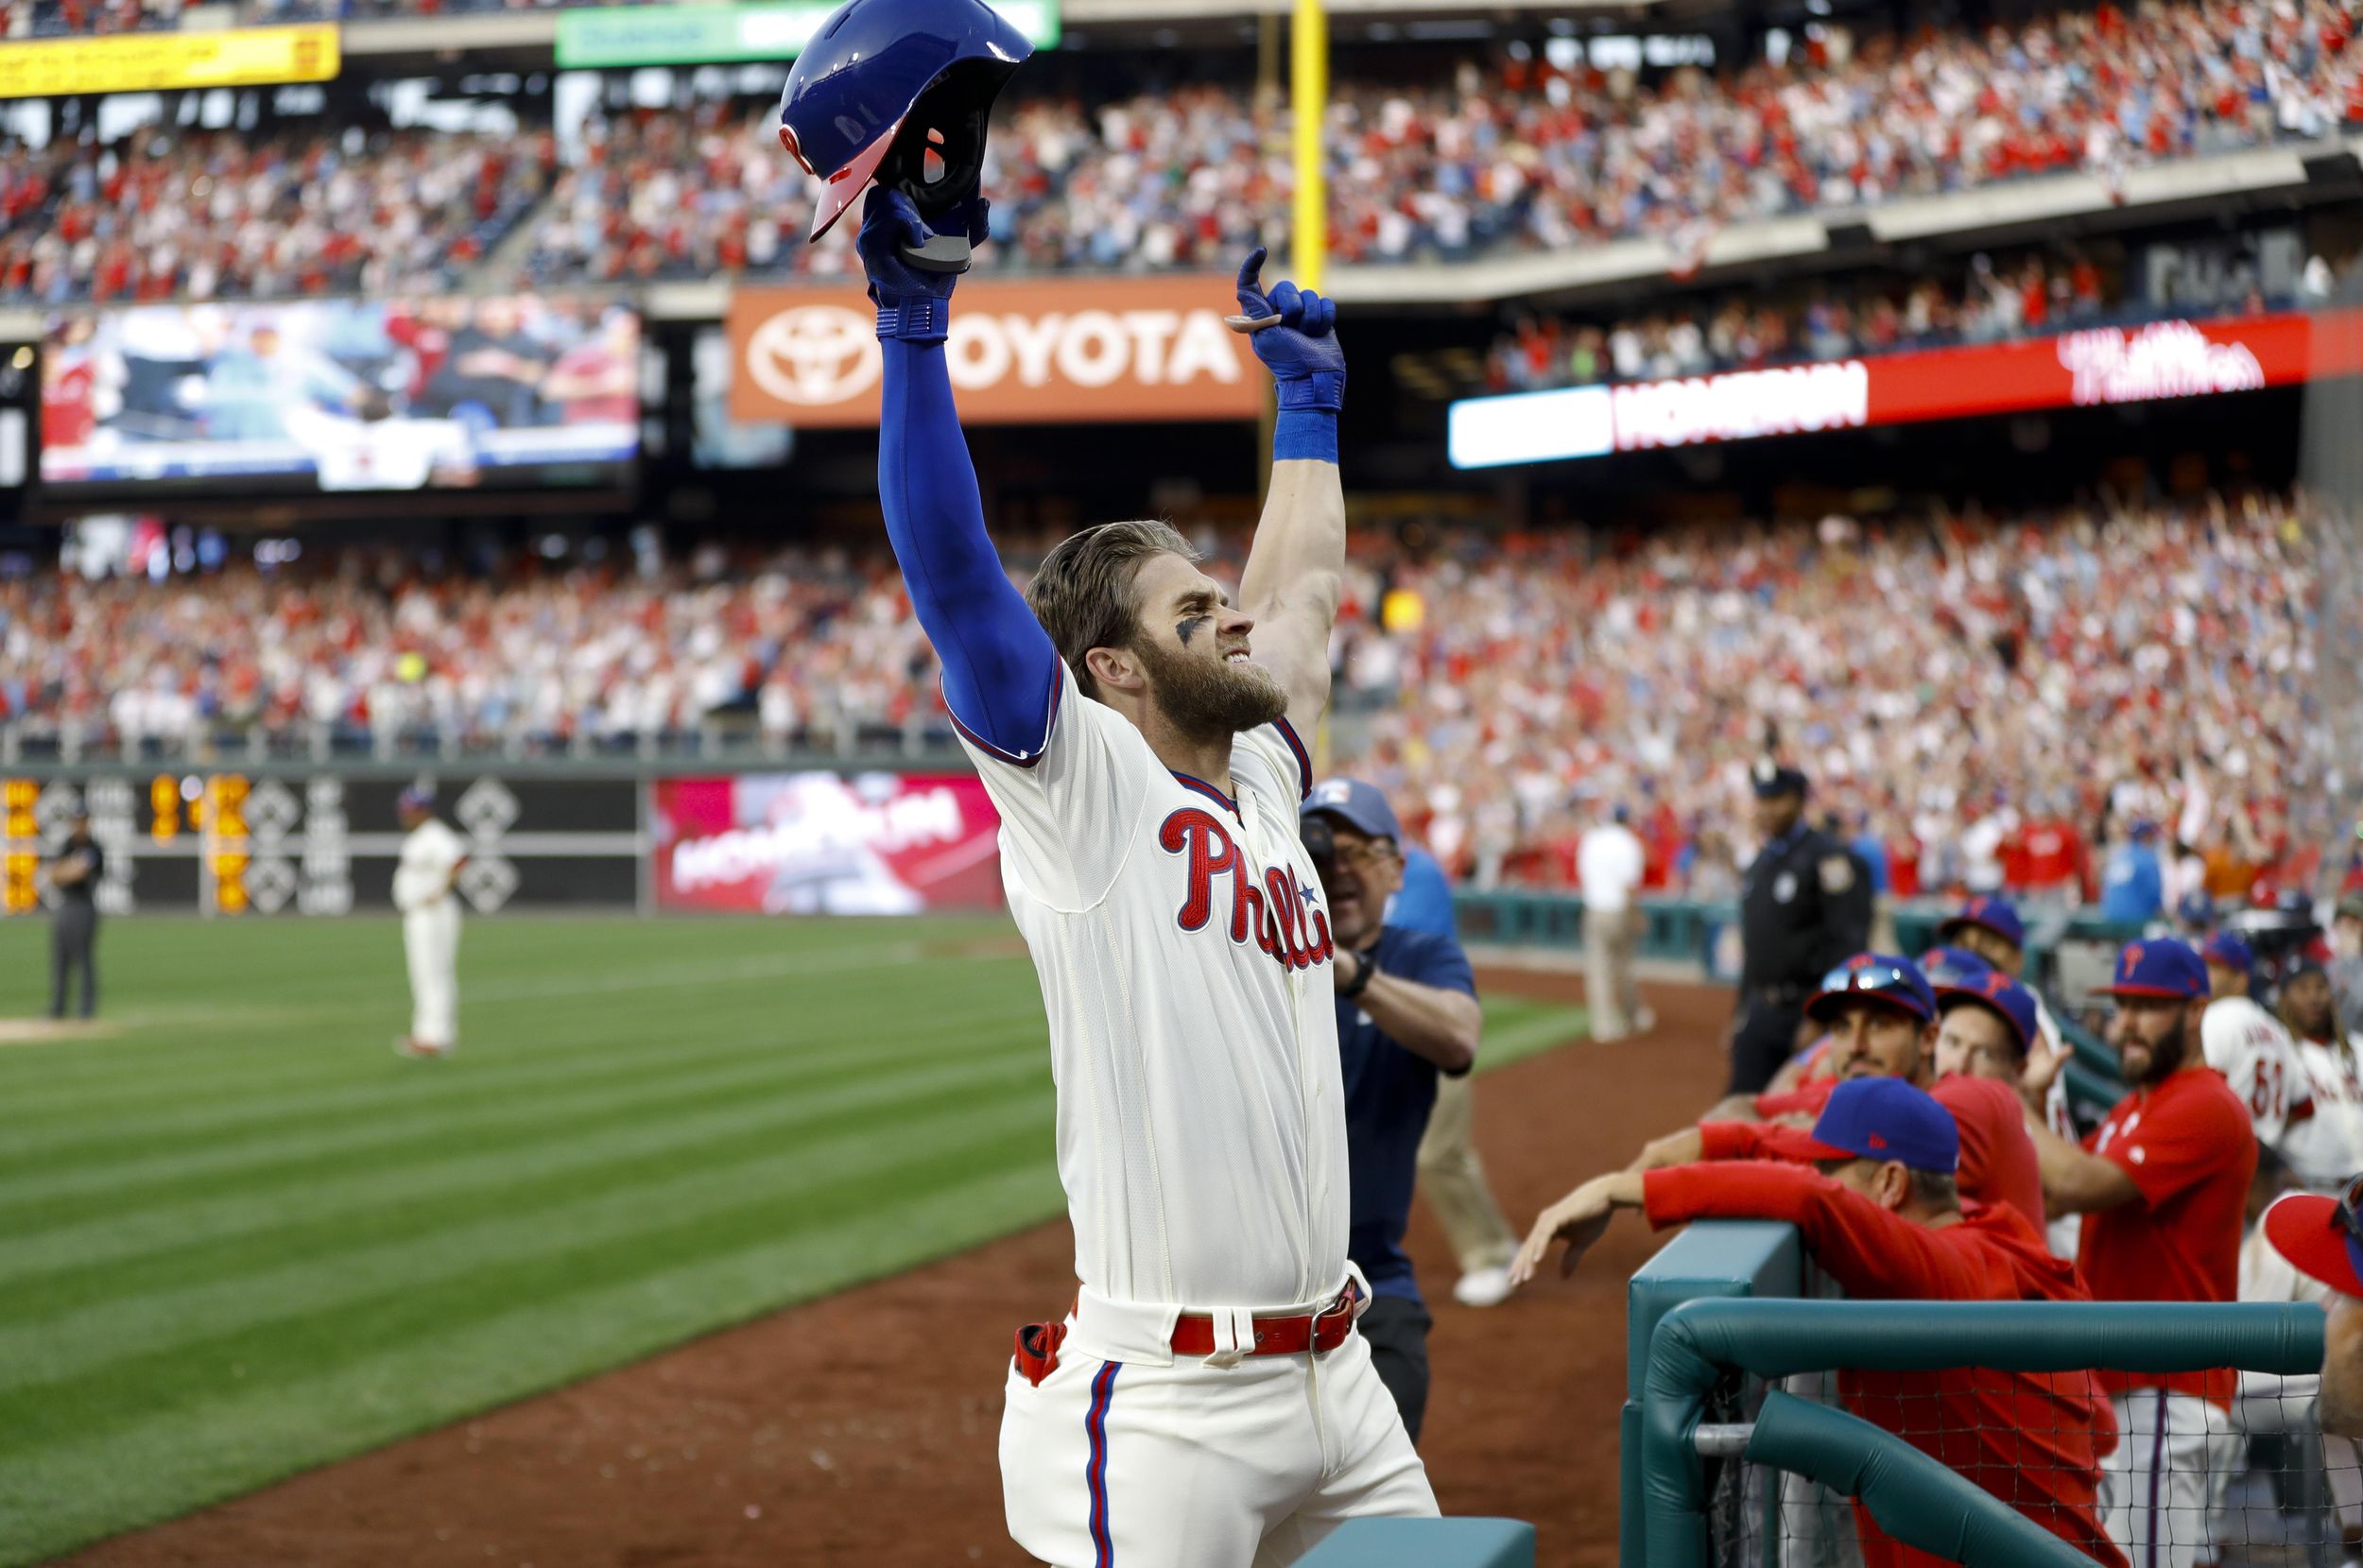 MLB roundup Bryce Harper hits first home run for Phillies in win over